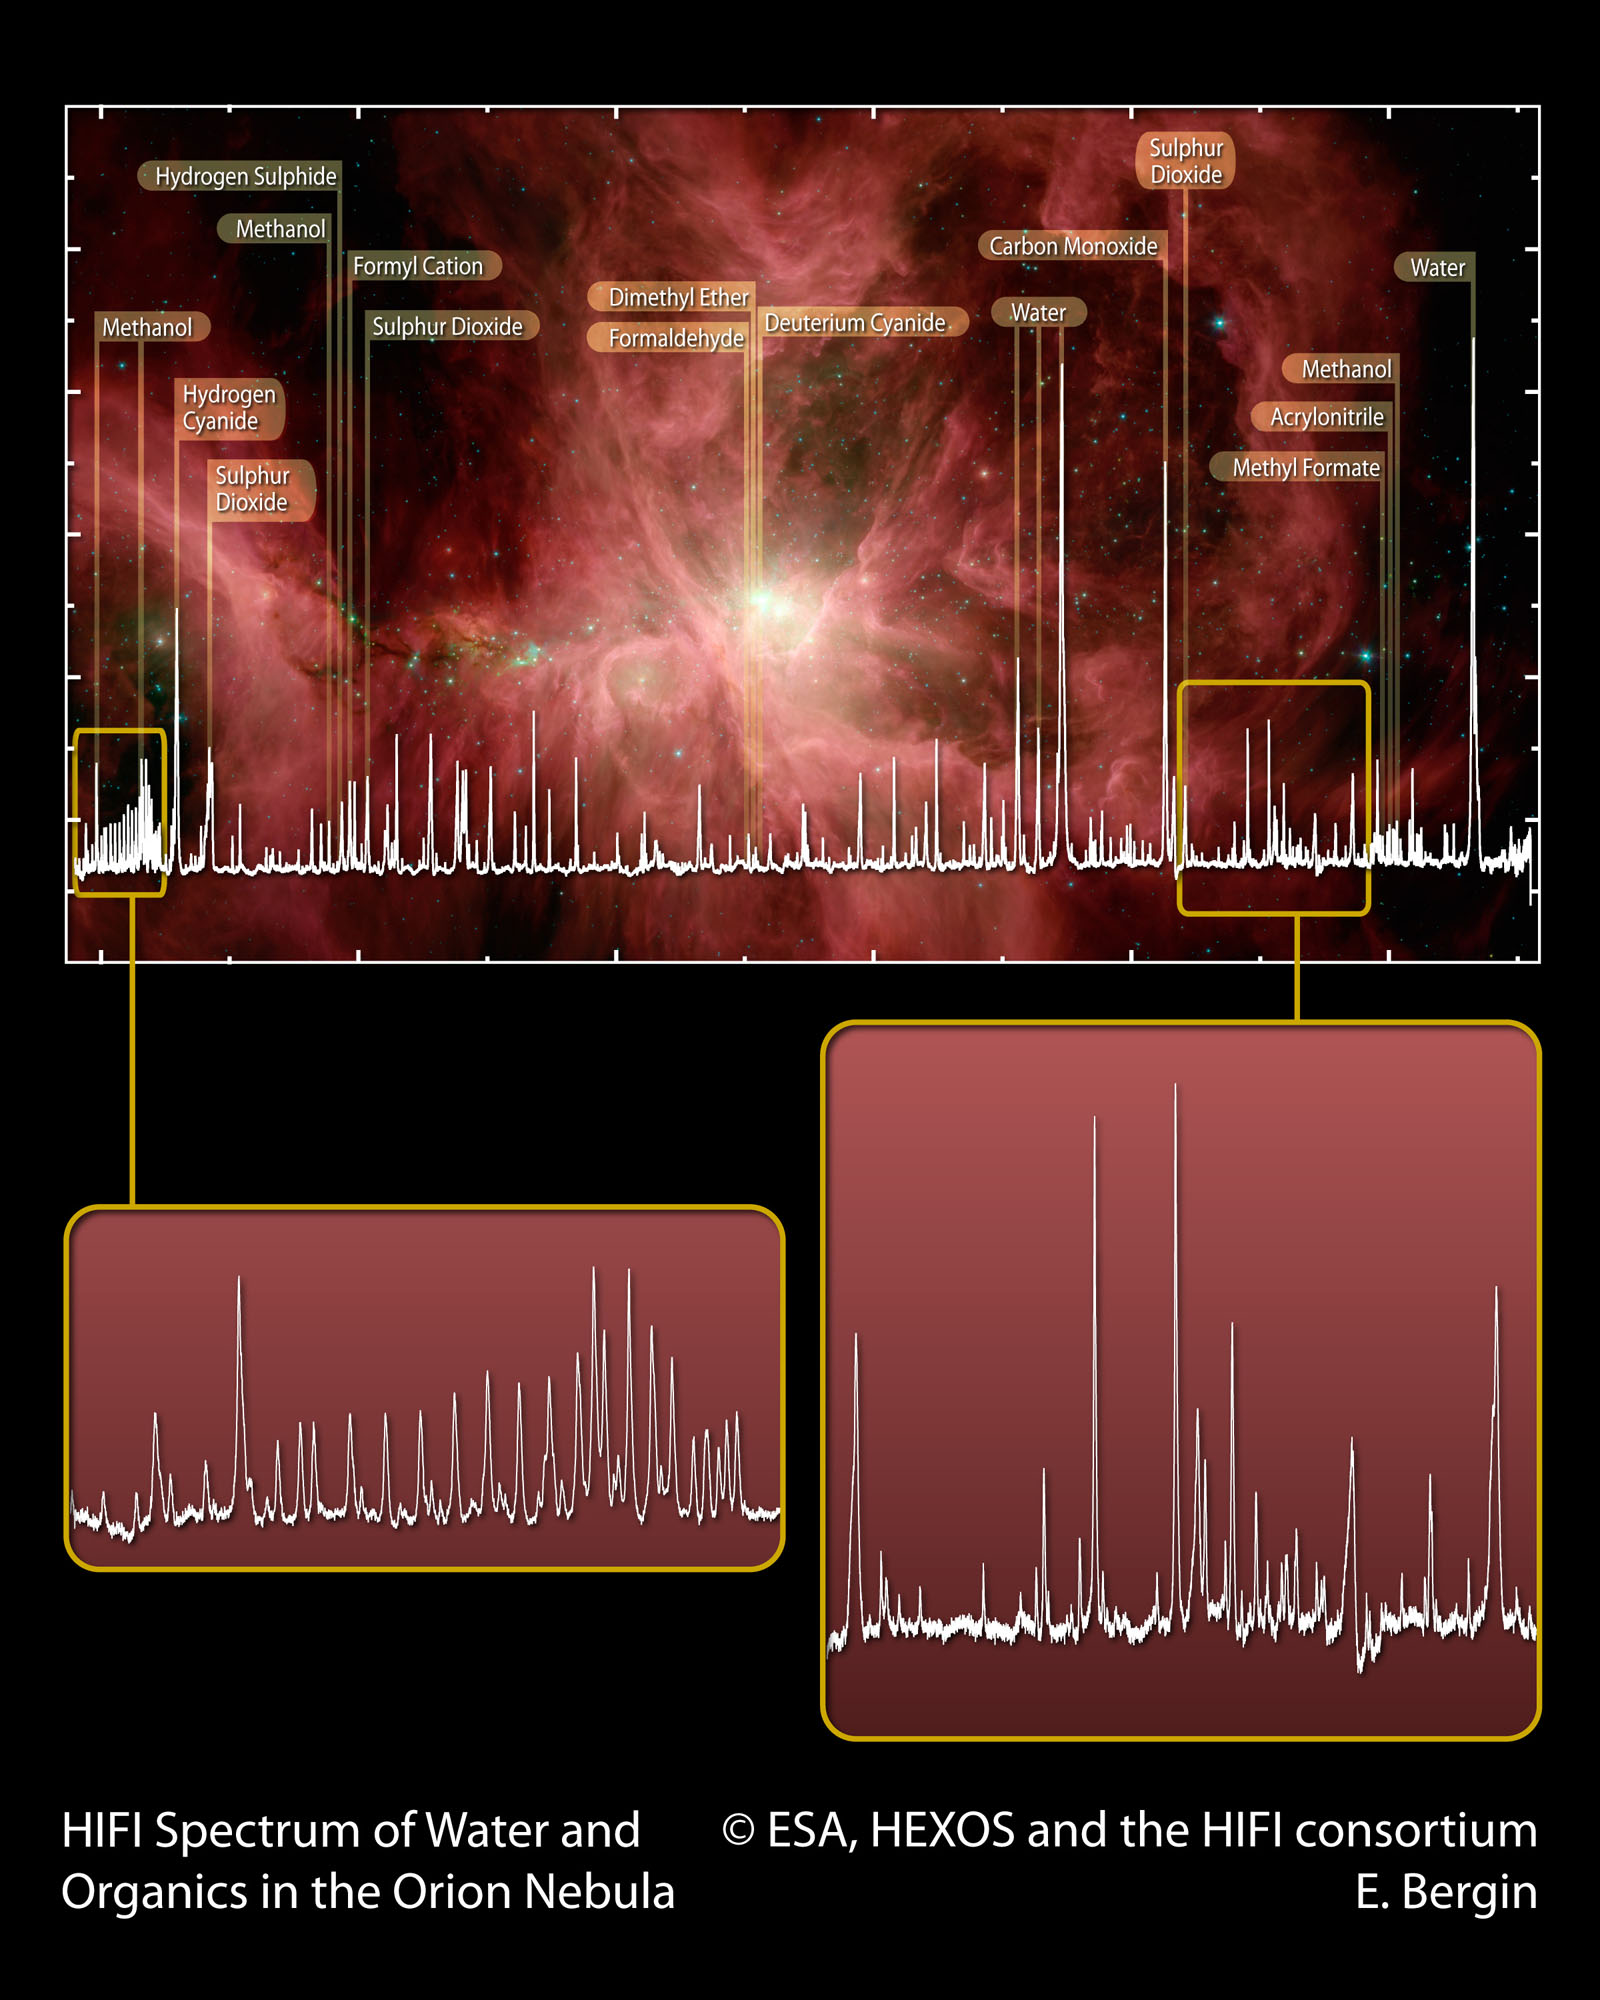 HIFI spectral scan of Orion (blowouts)